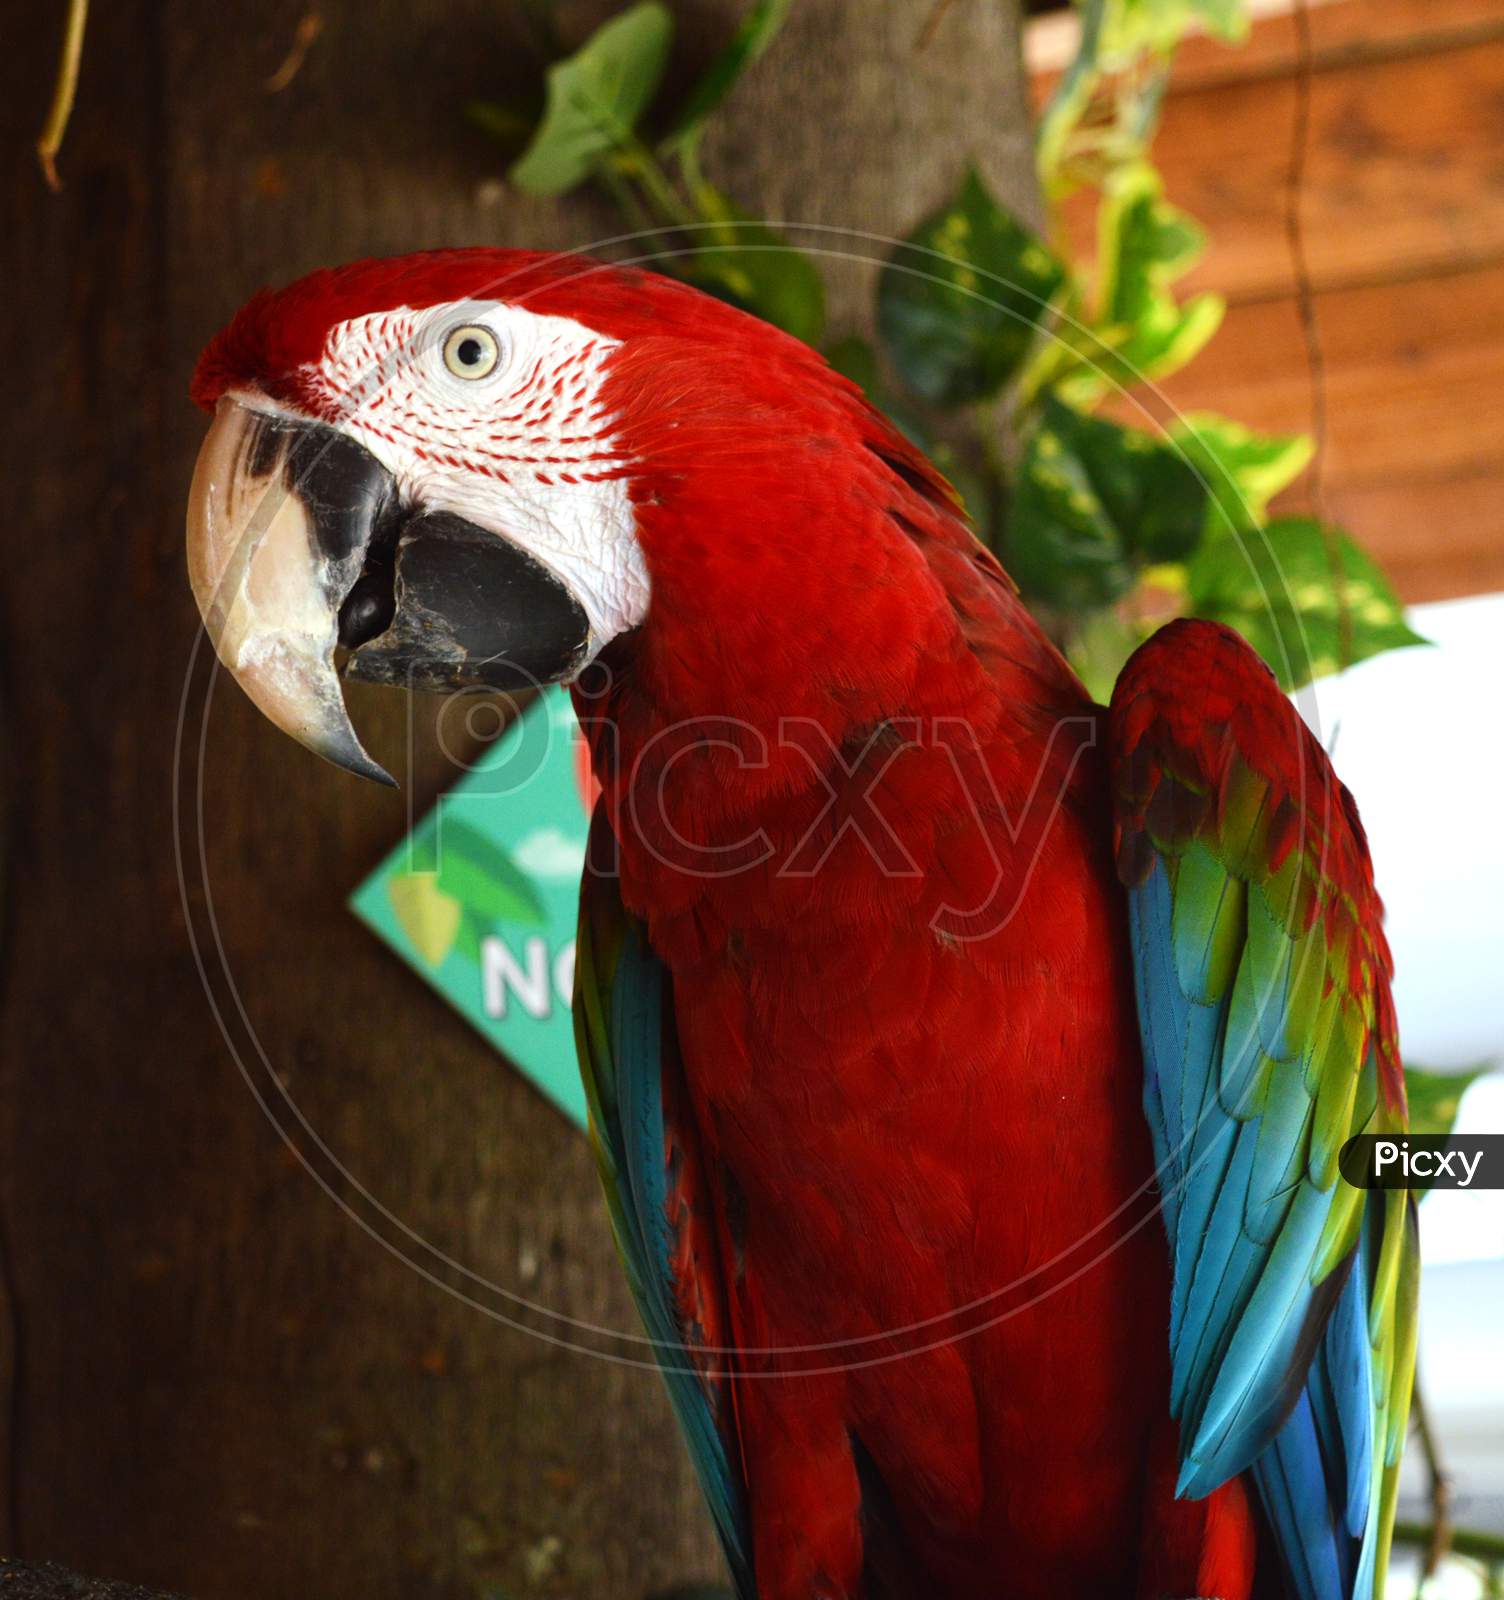 A red parrot